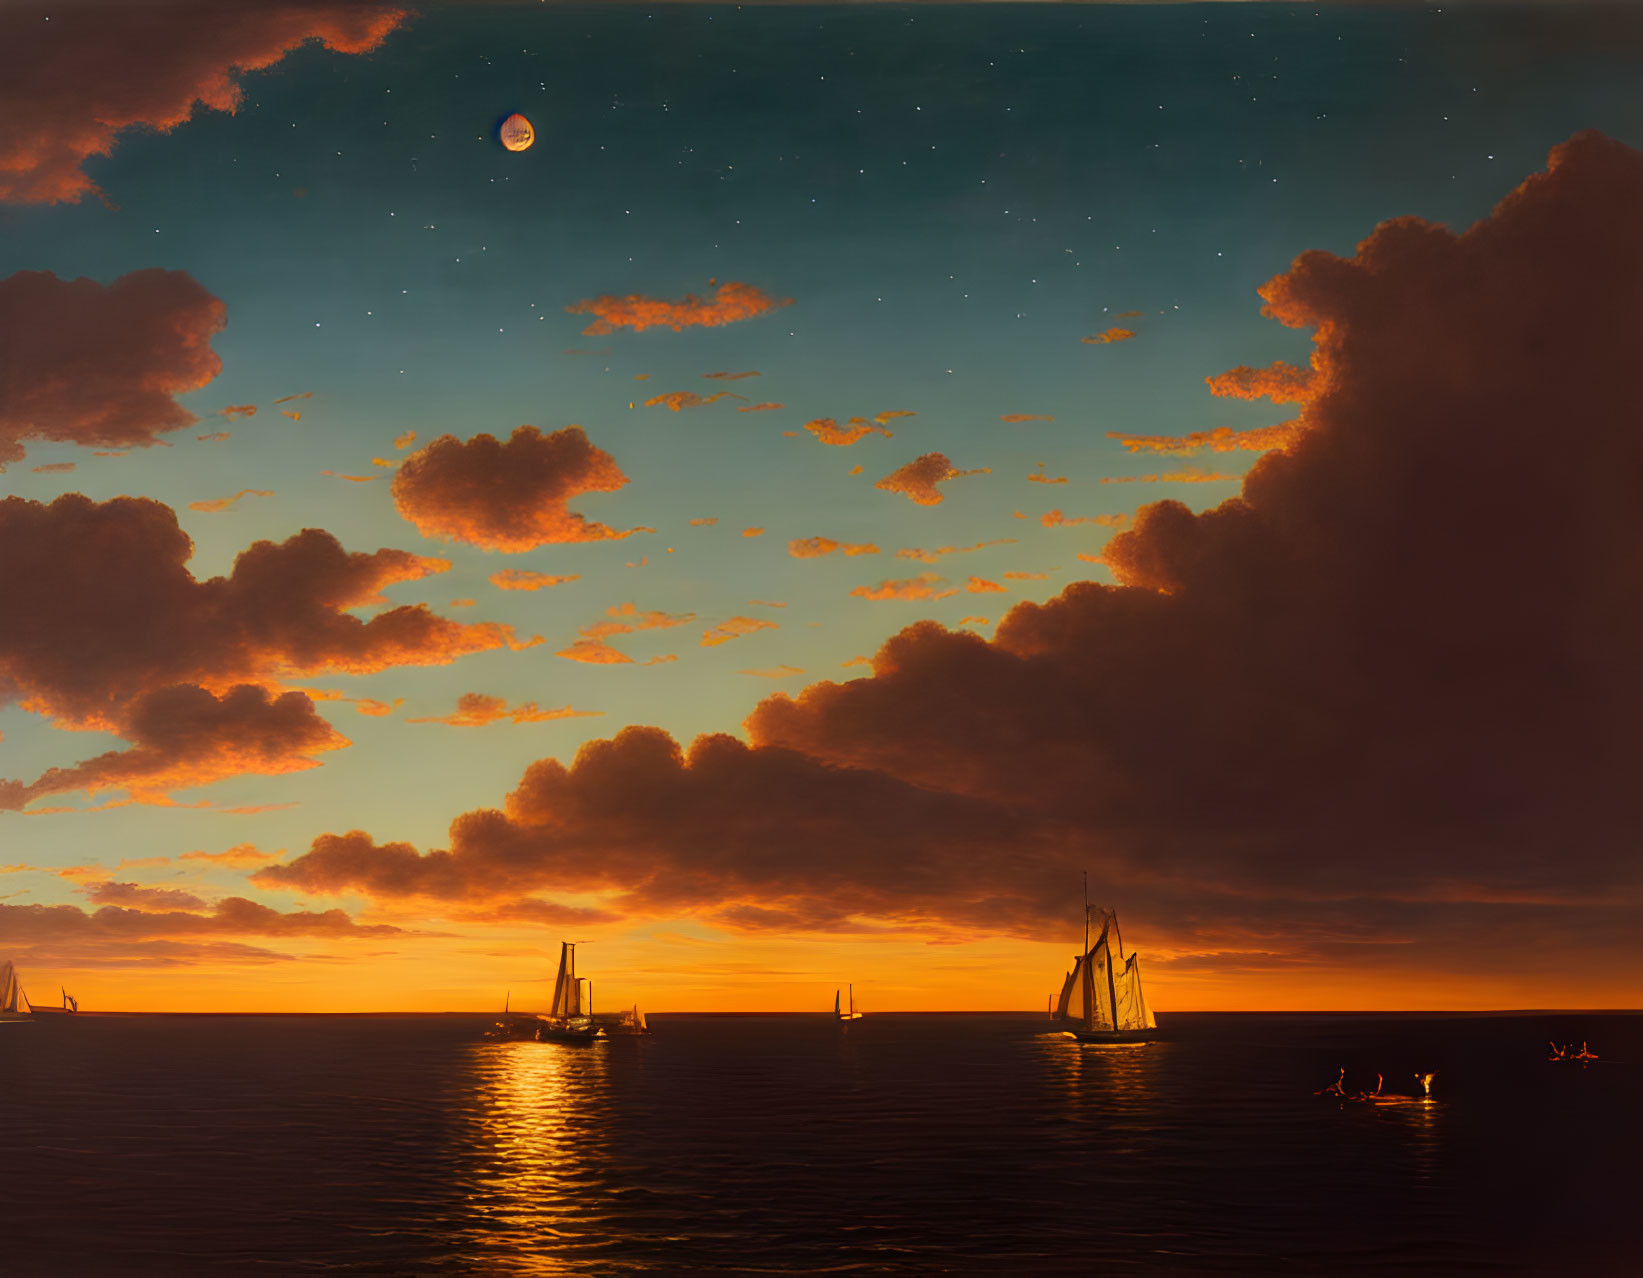 Twilight seascape with crescent moon, stars, sailing ships, and warm glow